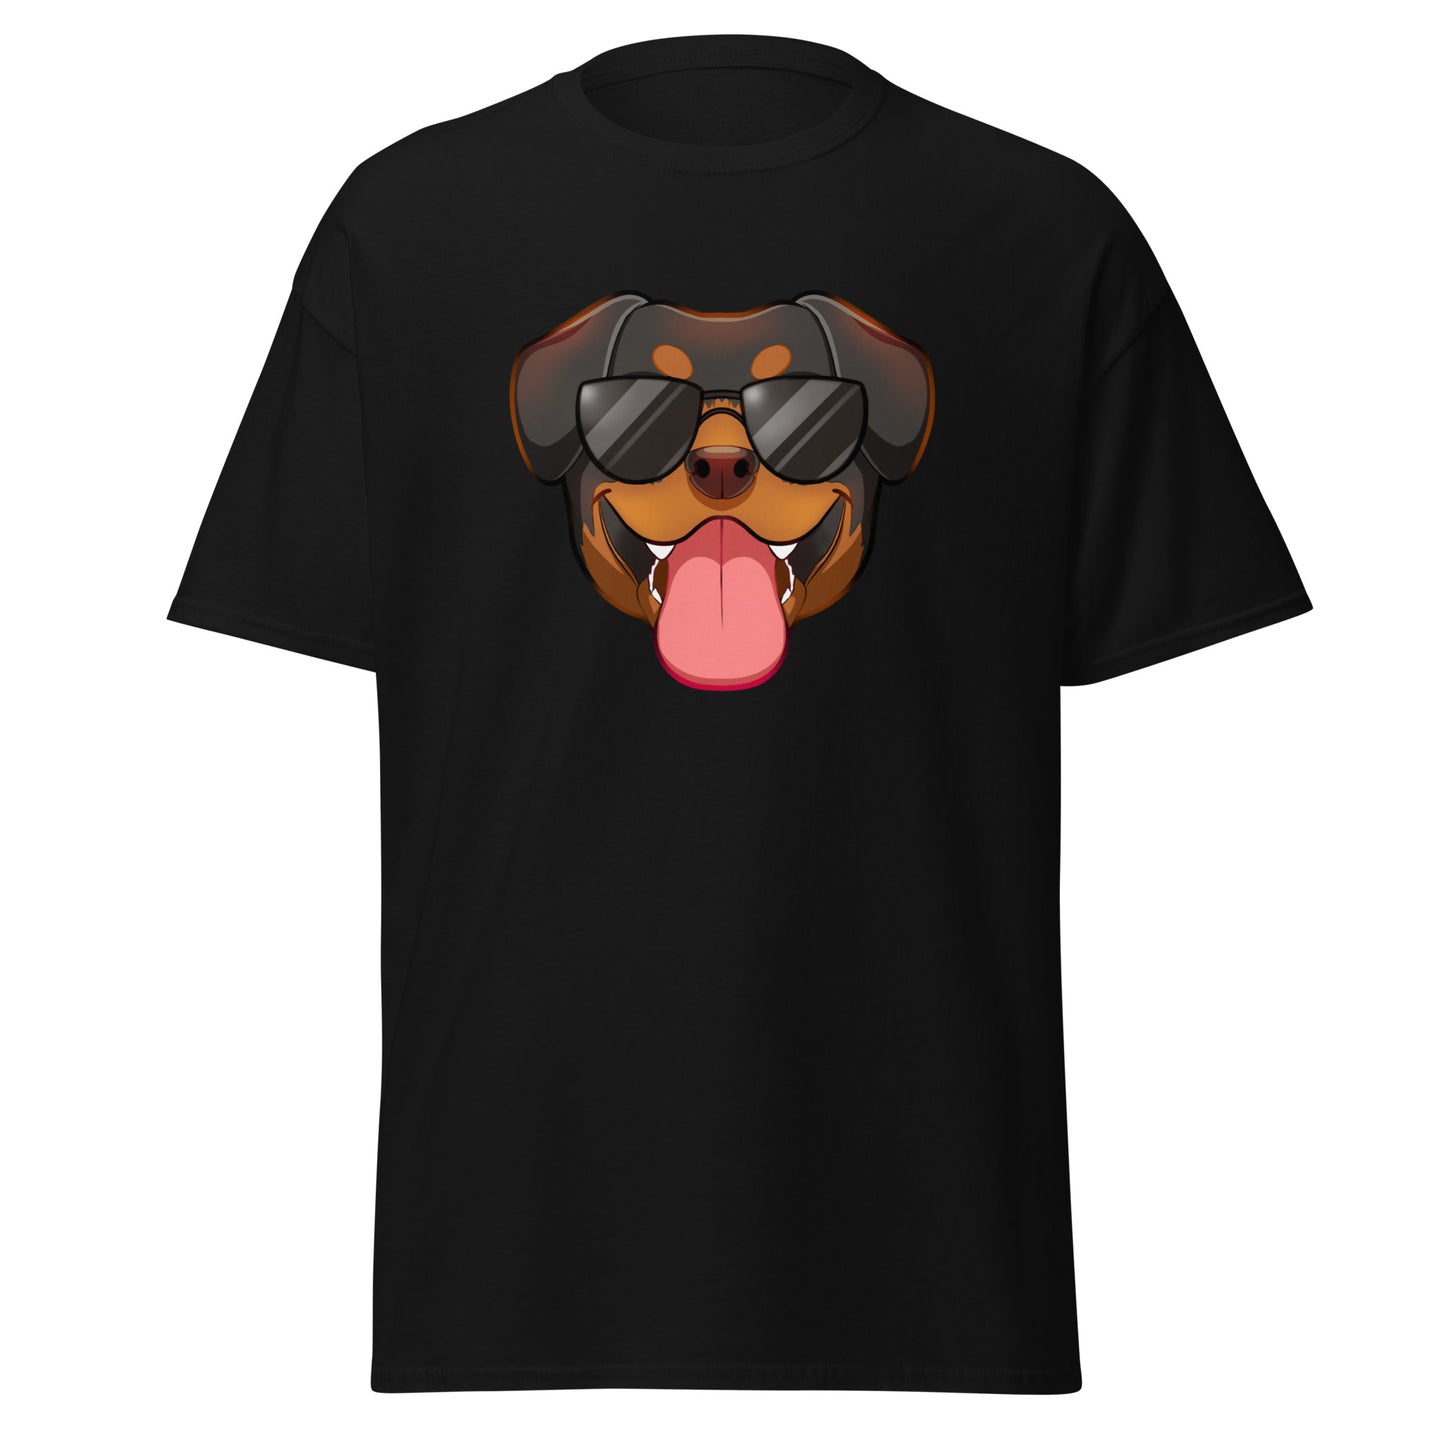 Cool Sunglasses Dog Gamer T-Shirt - Soft, High-Quality Tee for Twitch Streamers and Discorders